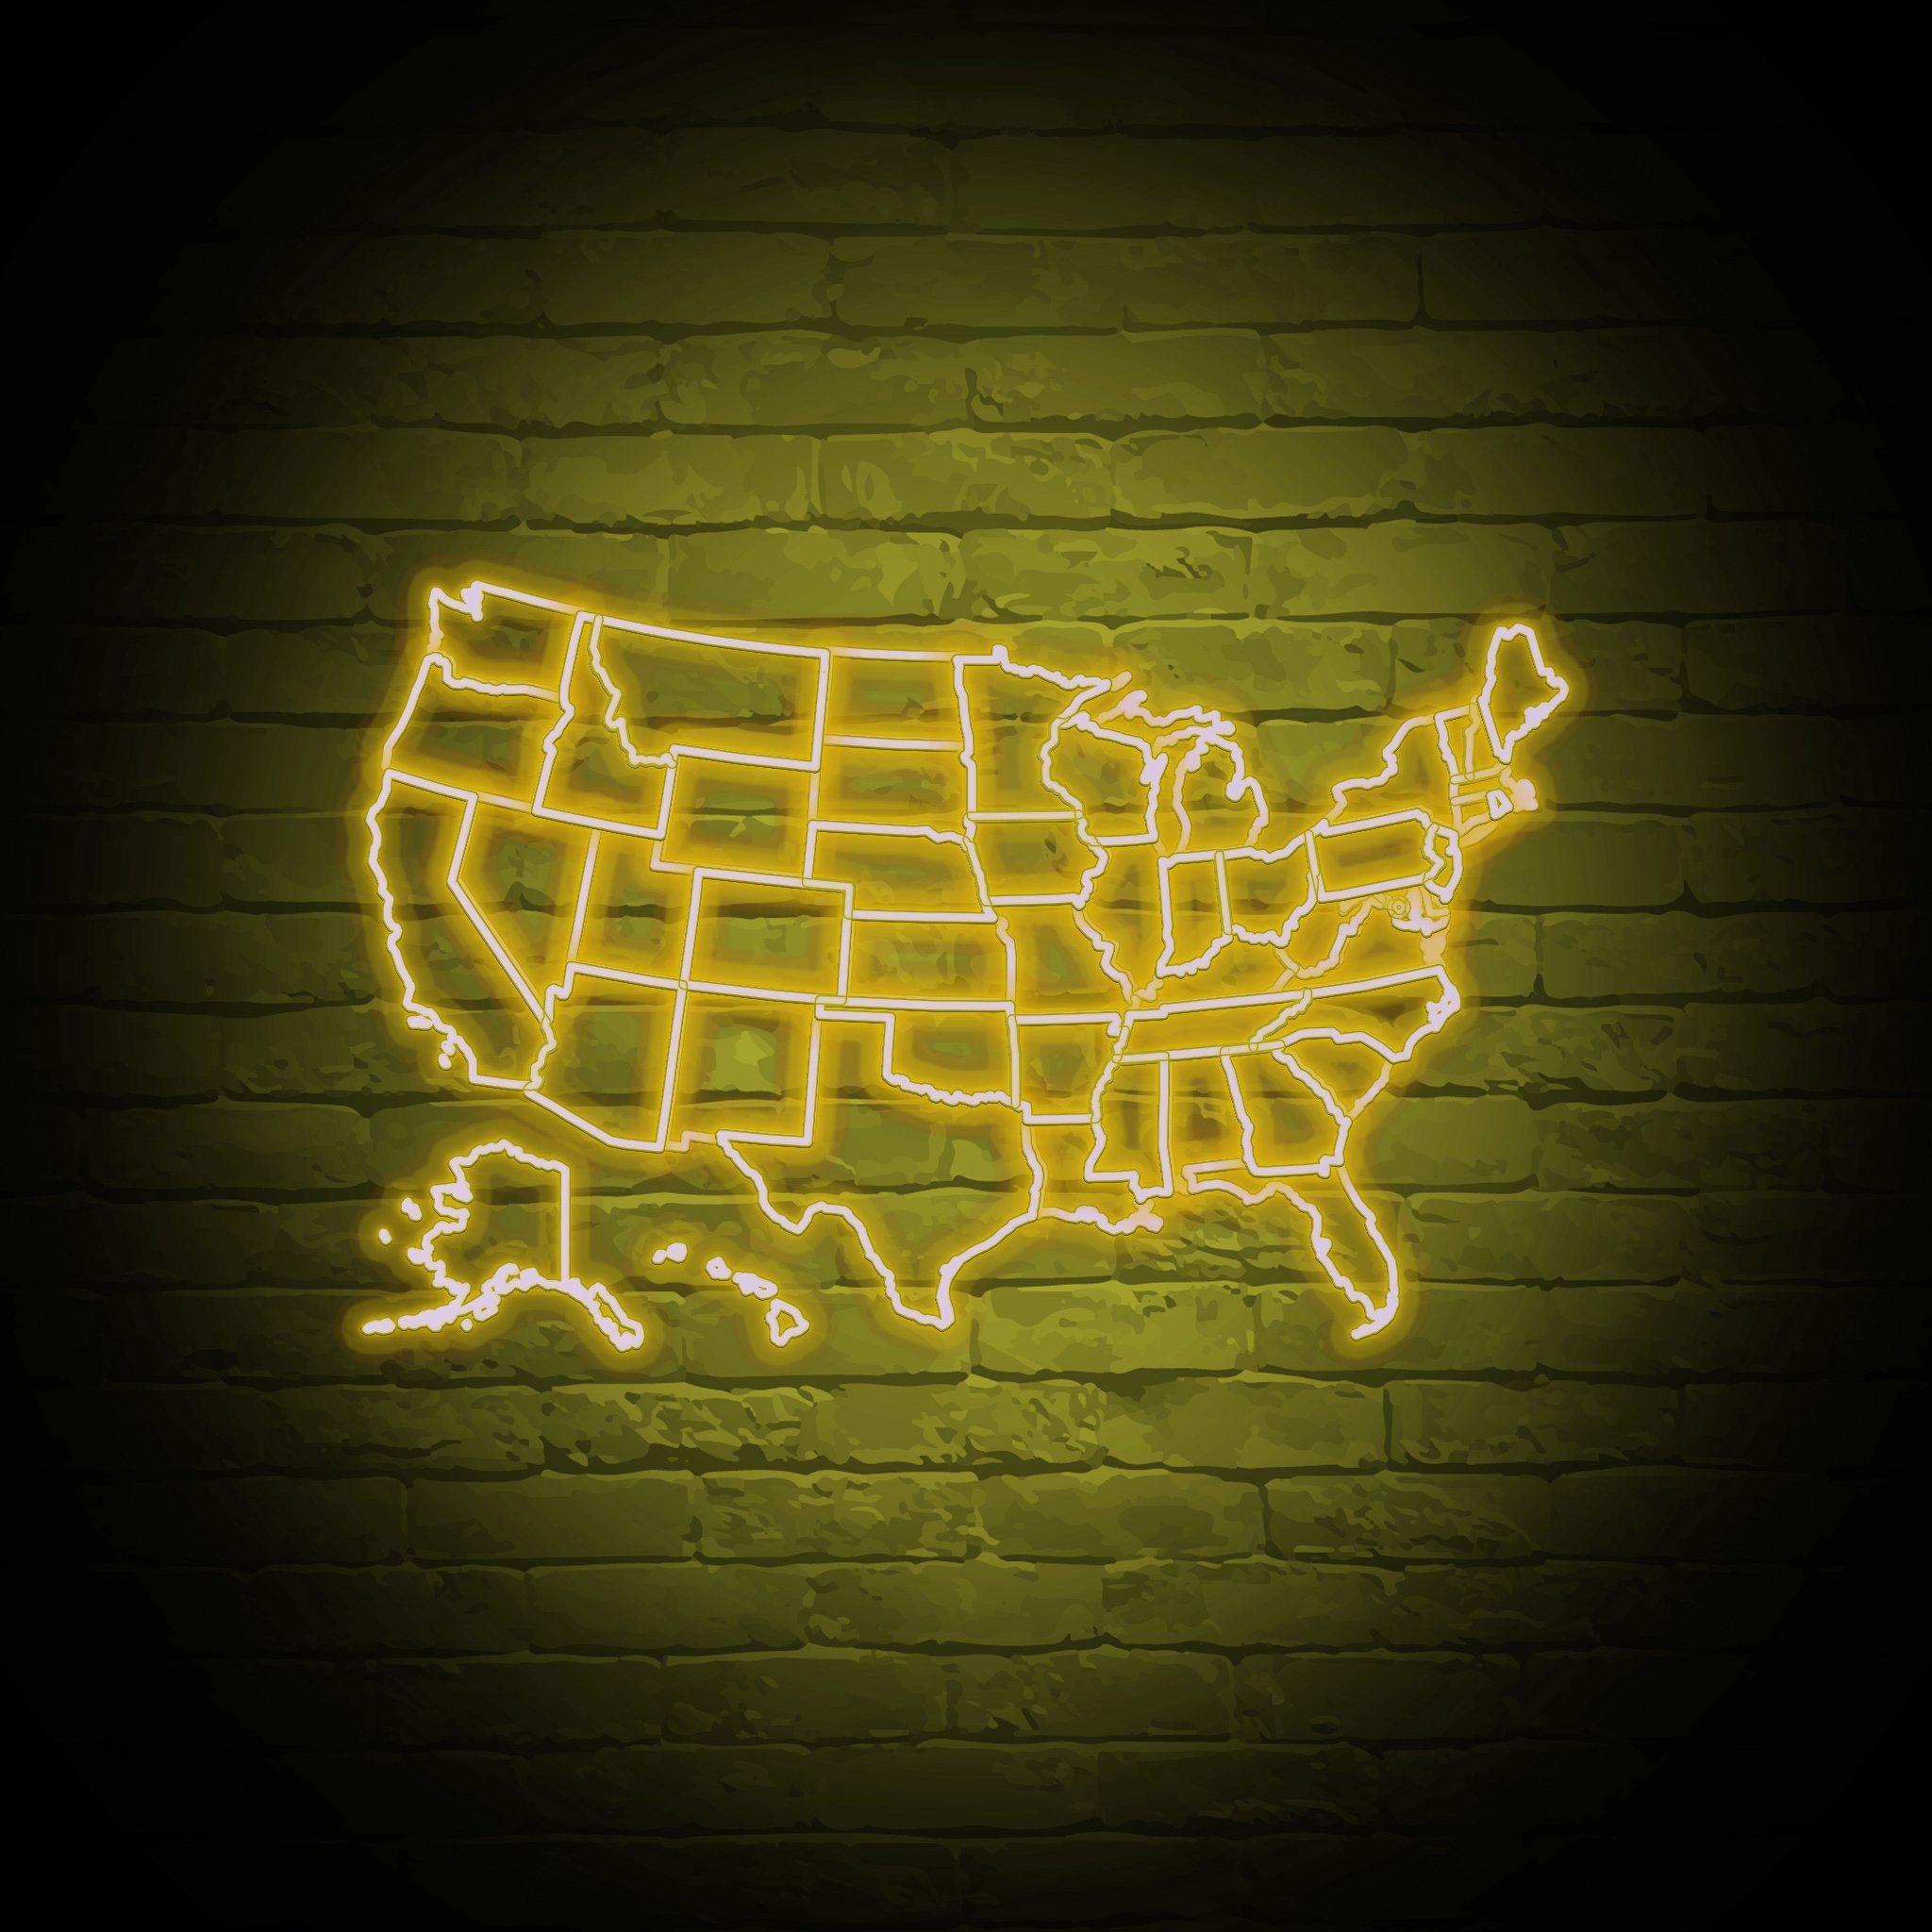 'USA' NEON SIGN - NeonFerry